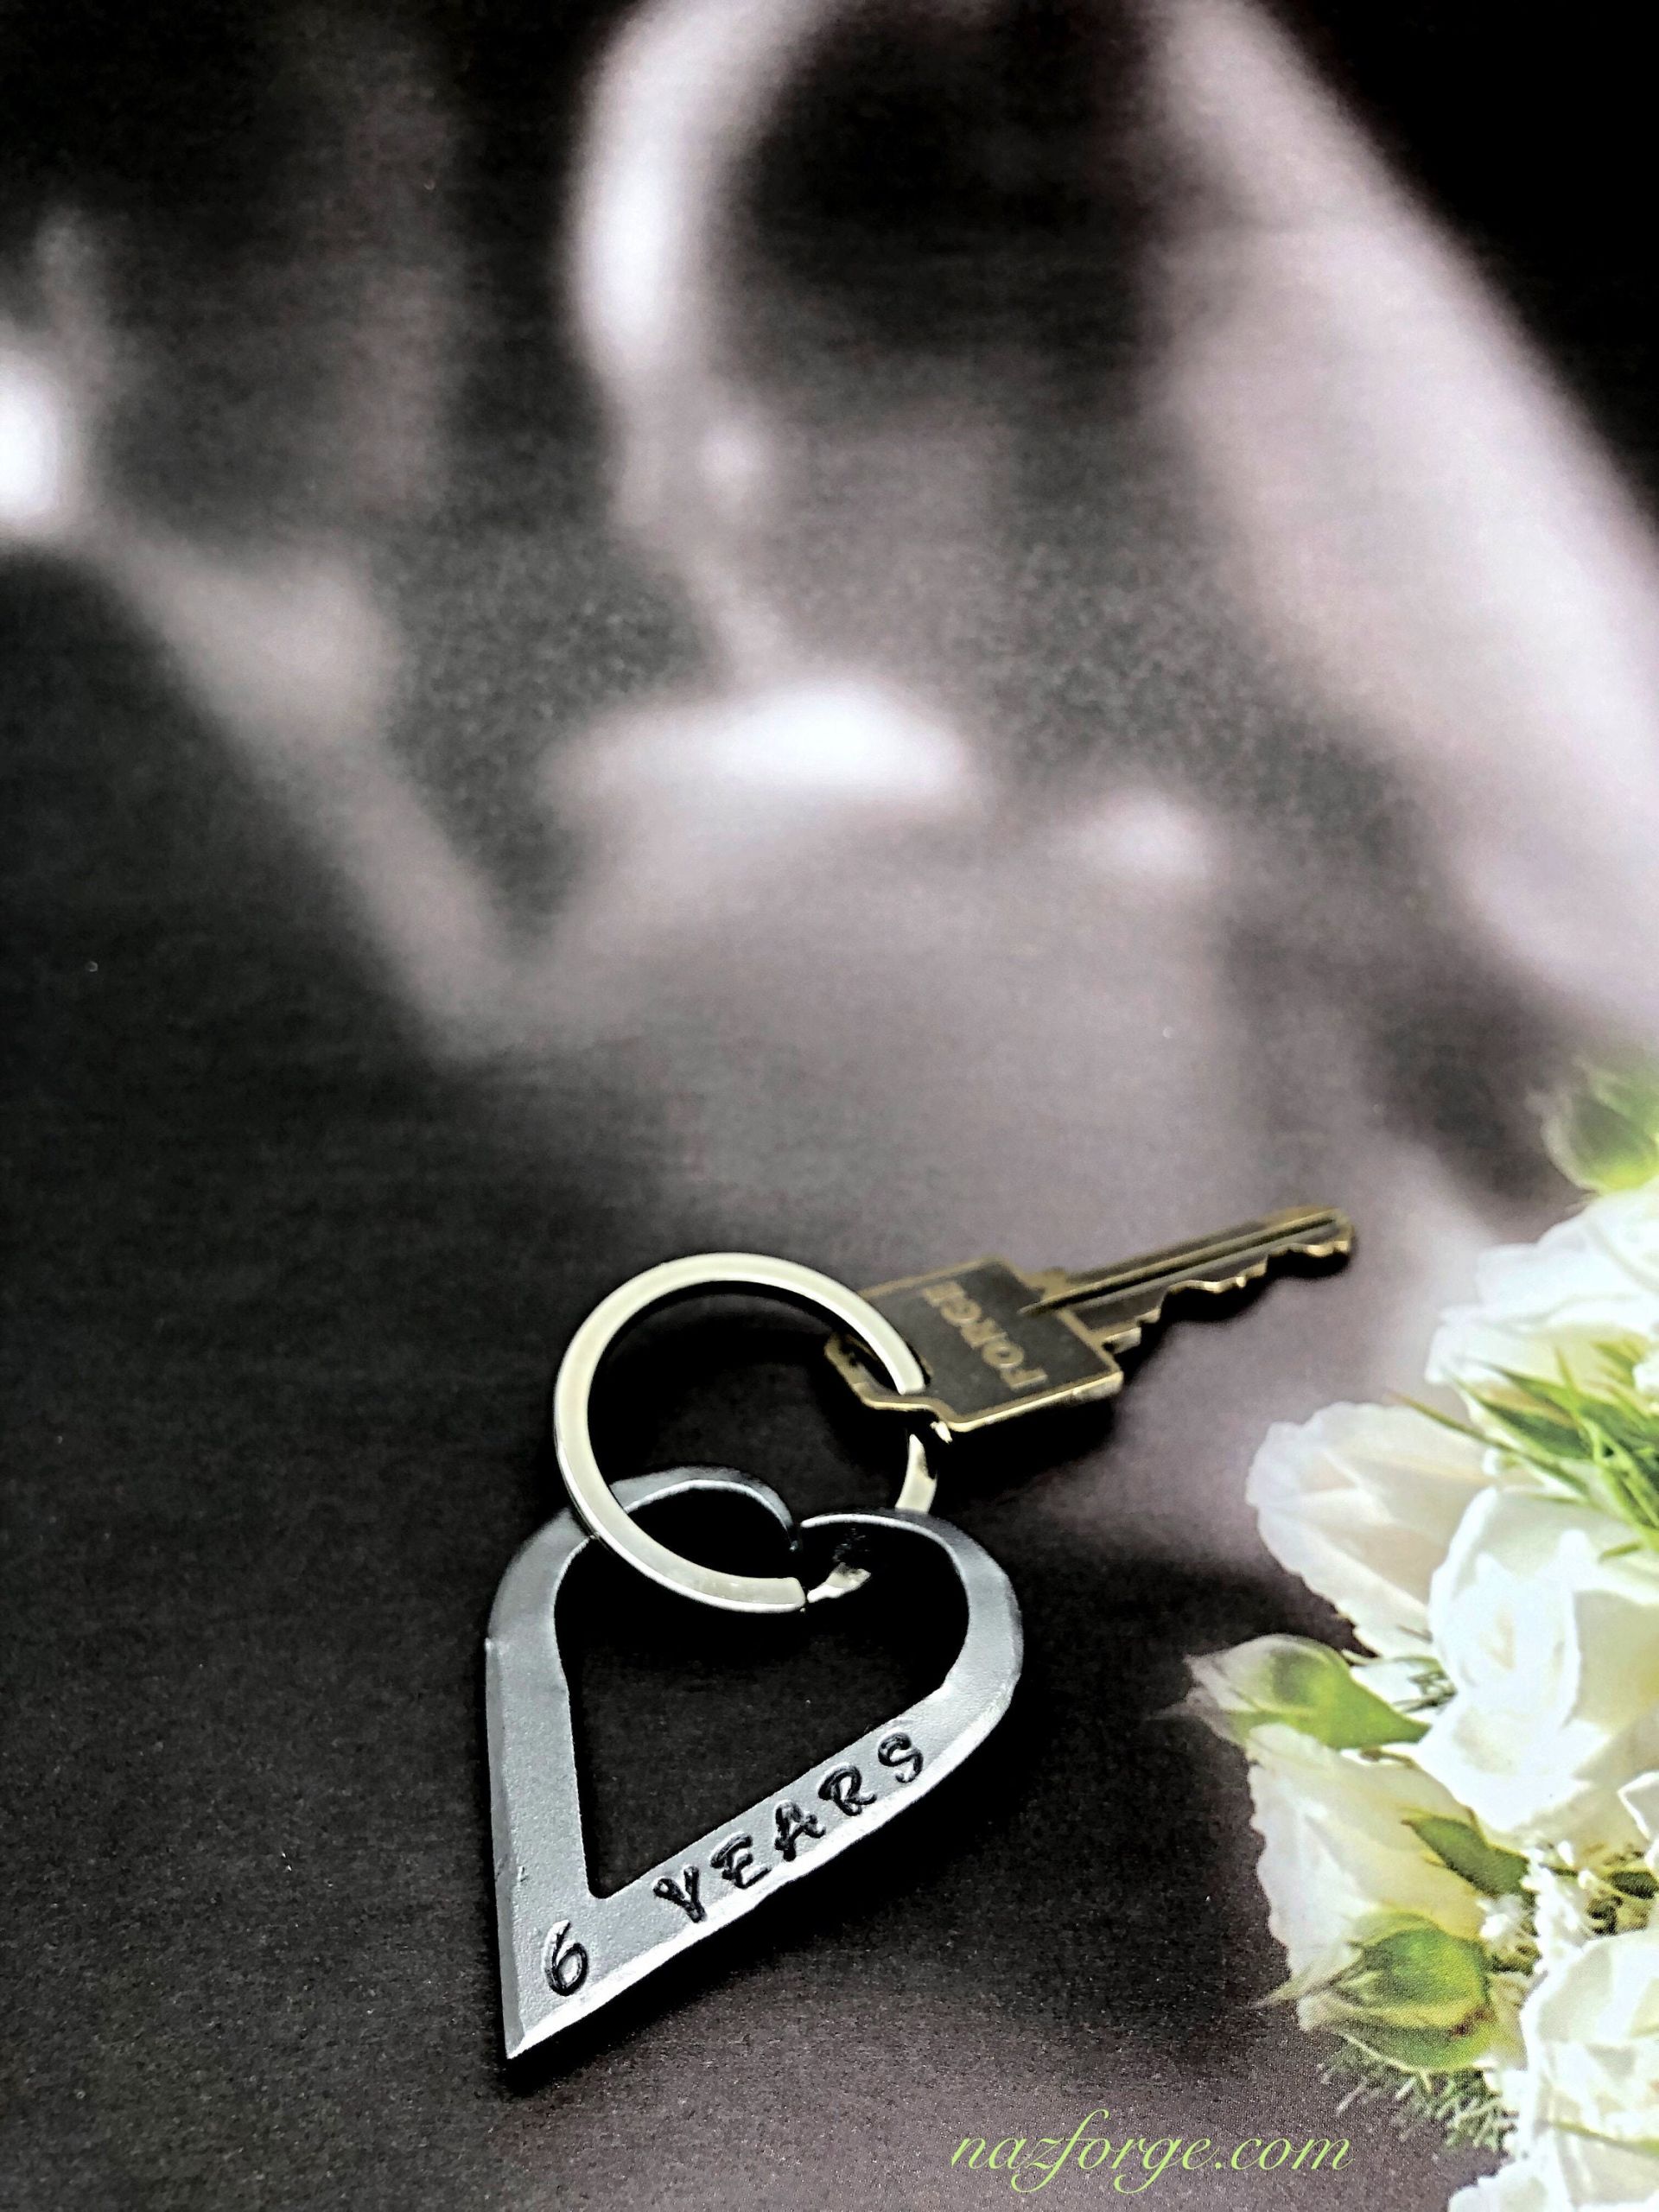 6Th Wedding Anniversary Gift Ideas For Him
 6th Wedding Anniversary Iron Keychain Gift Idea for Wife